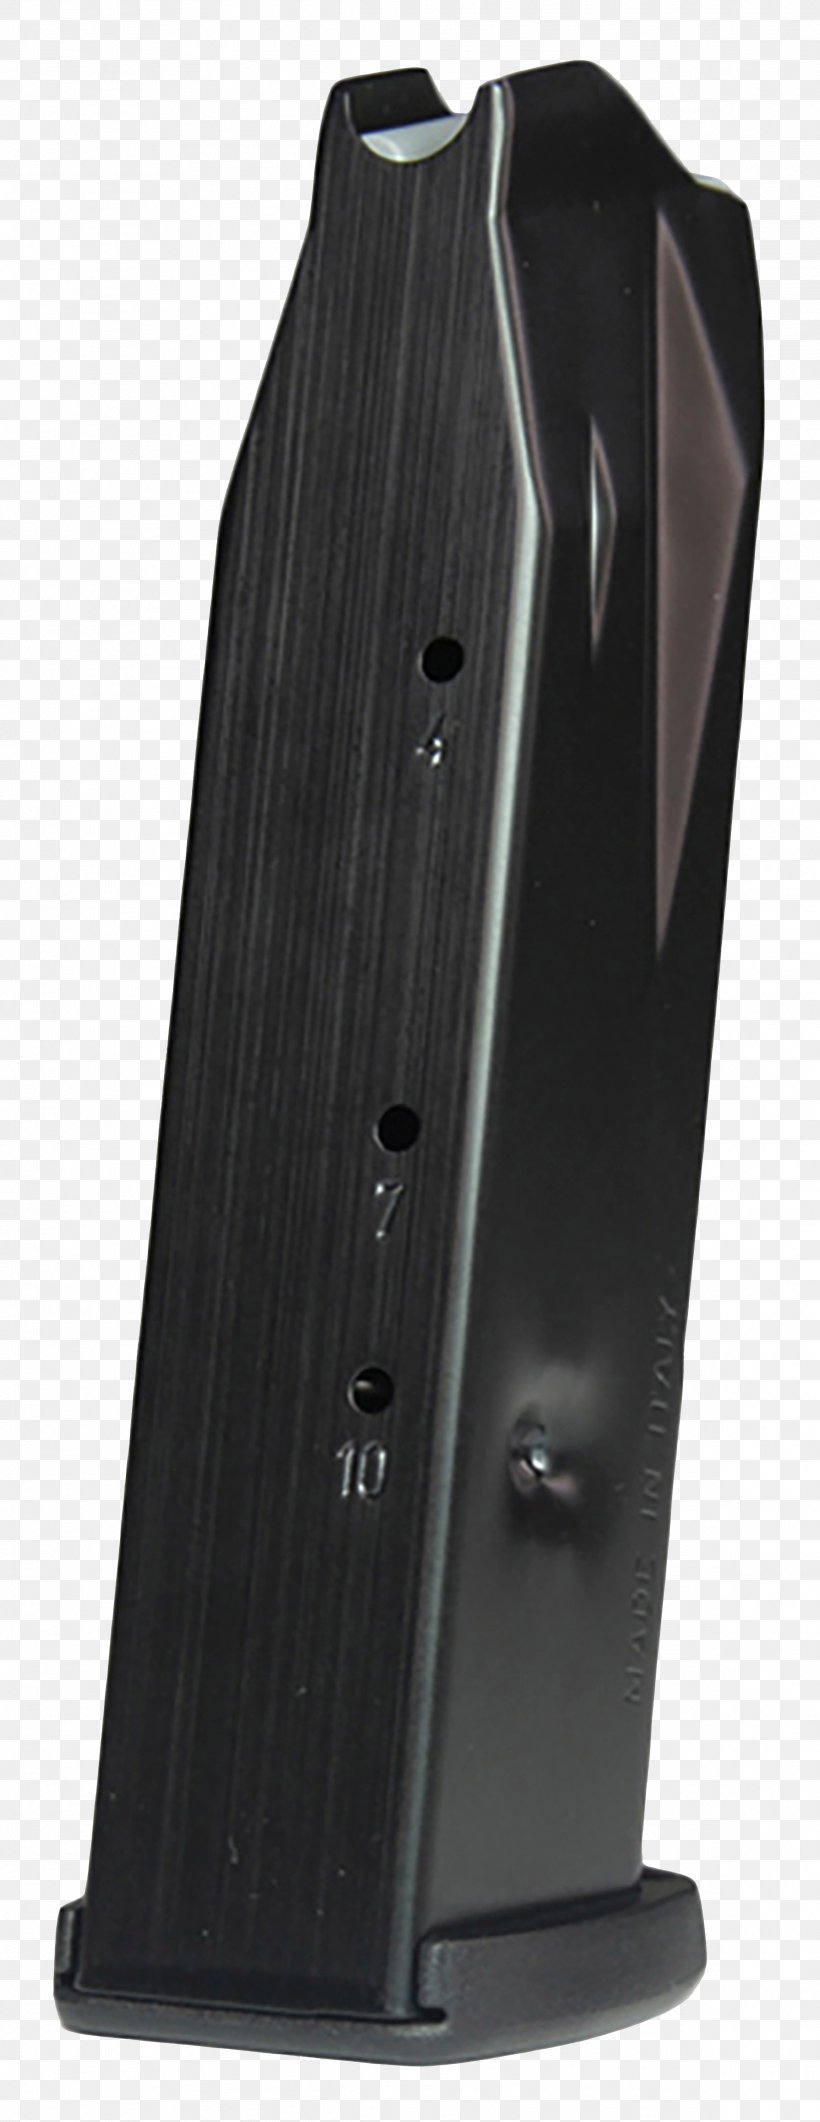 Walther PPQ Walther Arms 2810090 PPQ M2 45 ACP 10 RD Black Finish Carl Walther GmbH Magazine Computer Speakers, PNG, 2323x6012px, 45 Acp, Walther Ppq, Audio, Audio Equipment, Carl Walther Gmbh Download Free